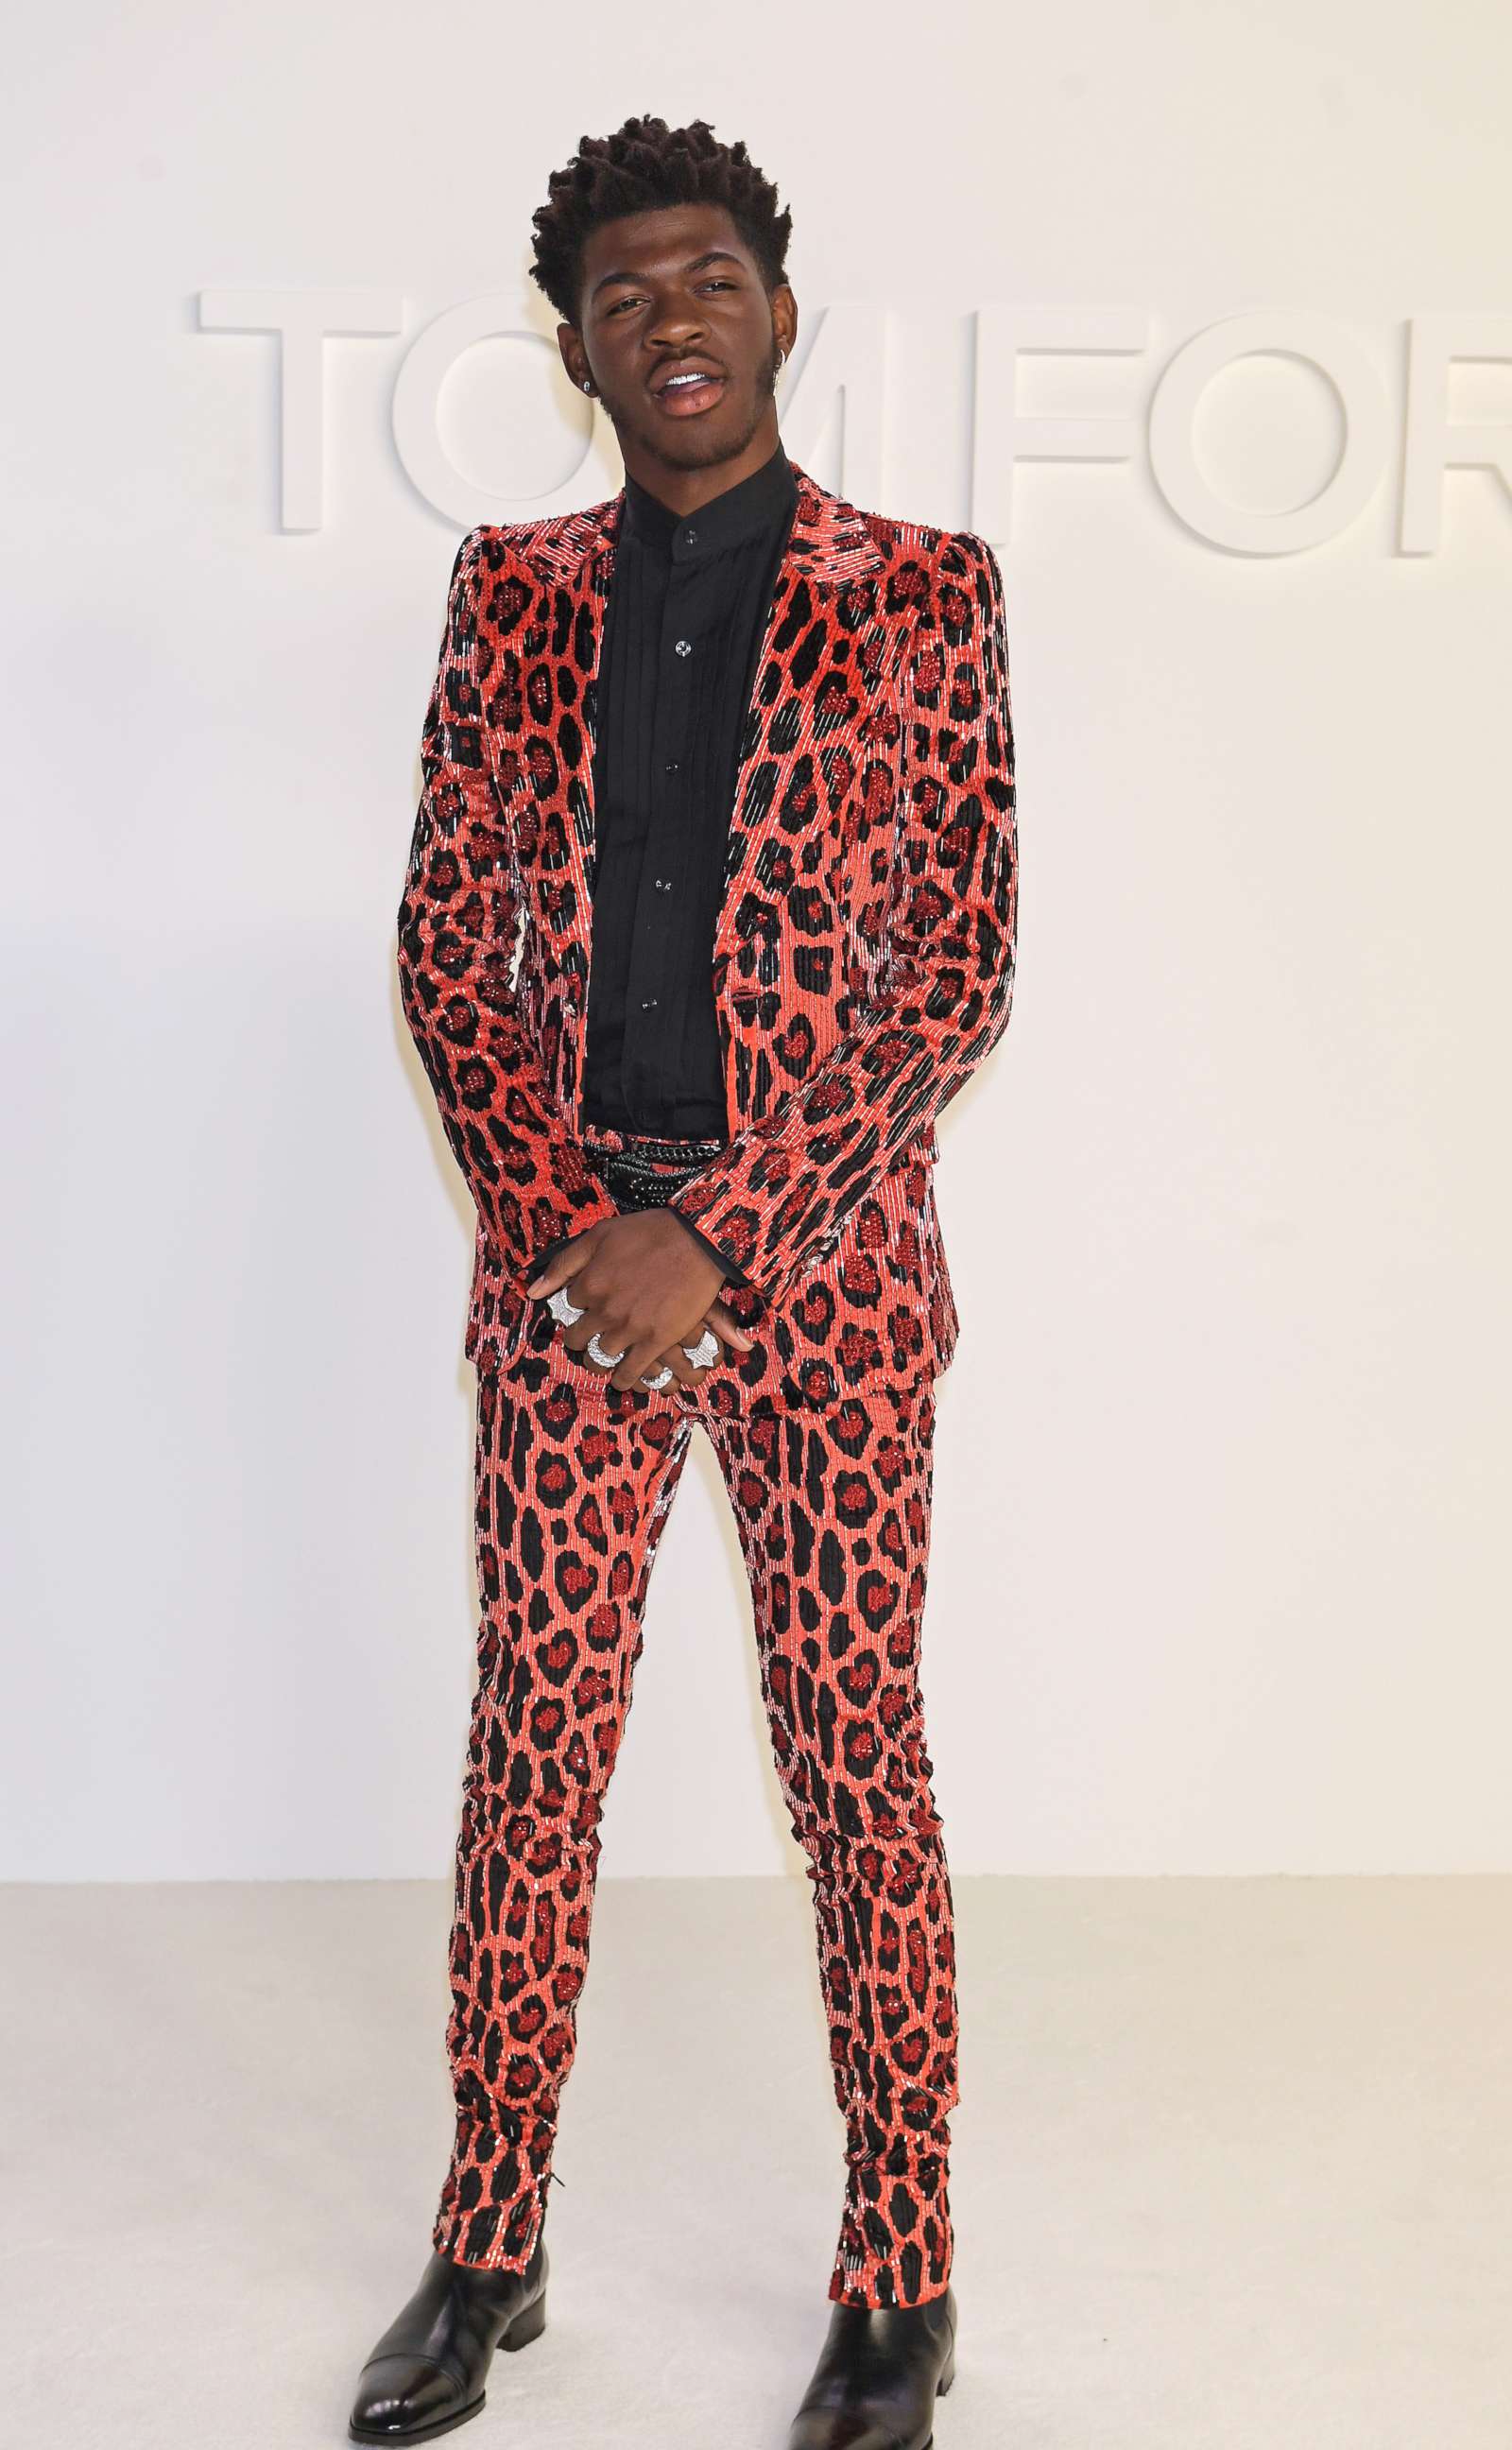 PHOTO: Lil Nas X attends the Tom Ford AW20 show at Milk Studios on Feb. 7, 2020 in Hollywood, Calif.